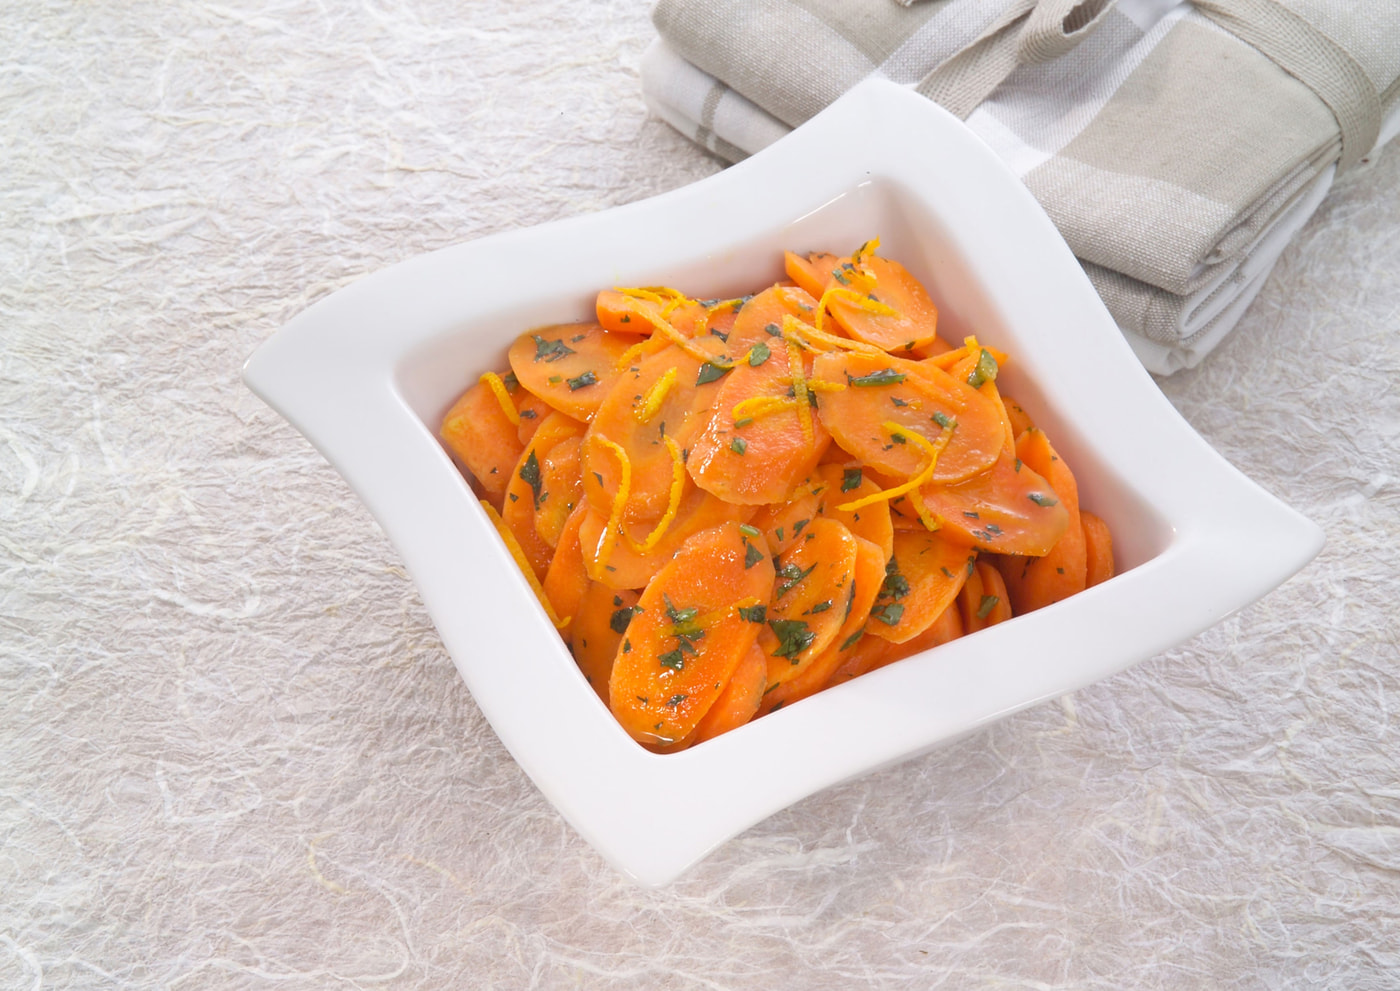 Carrots with lemon and coriander